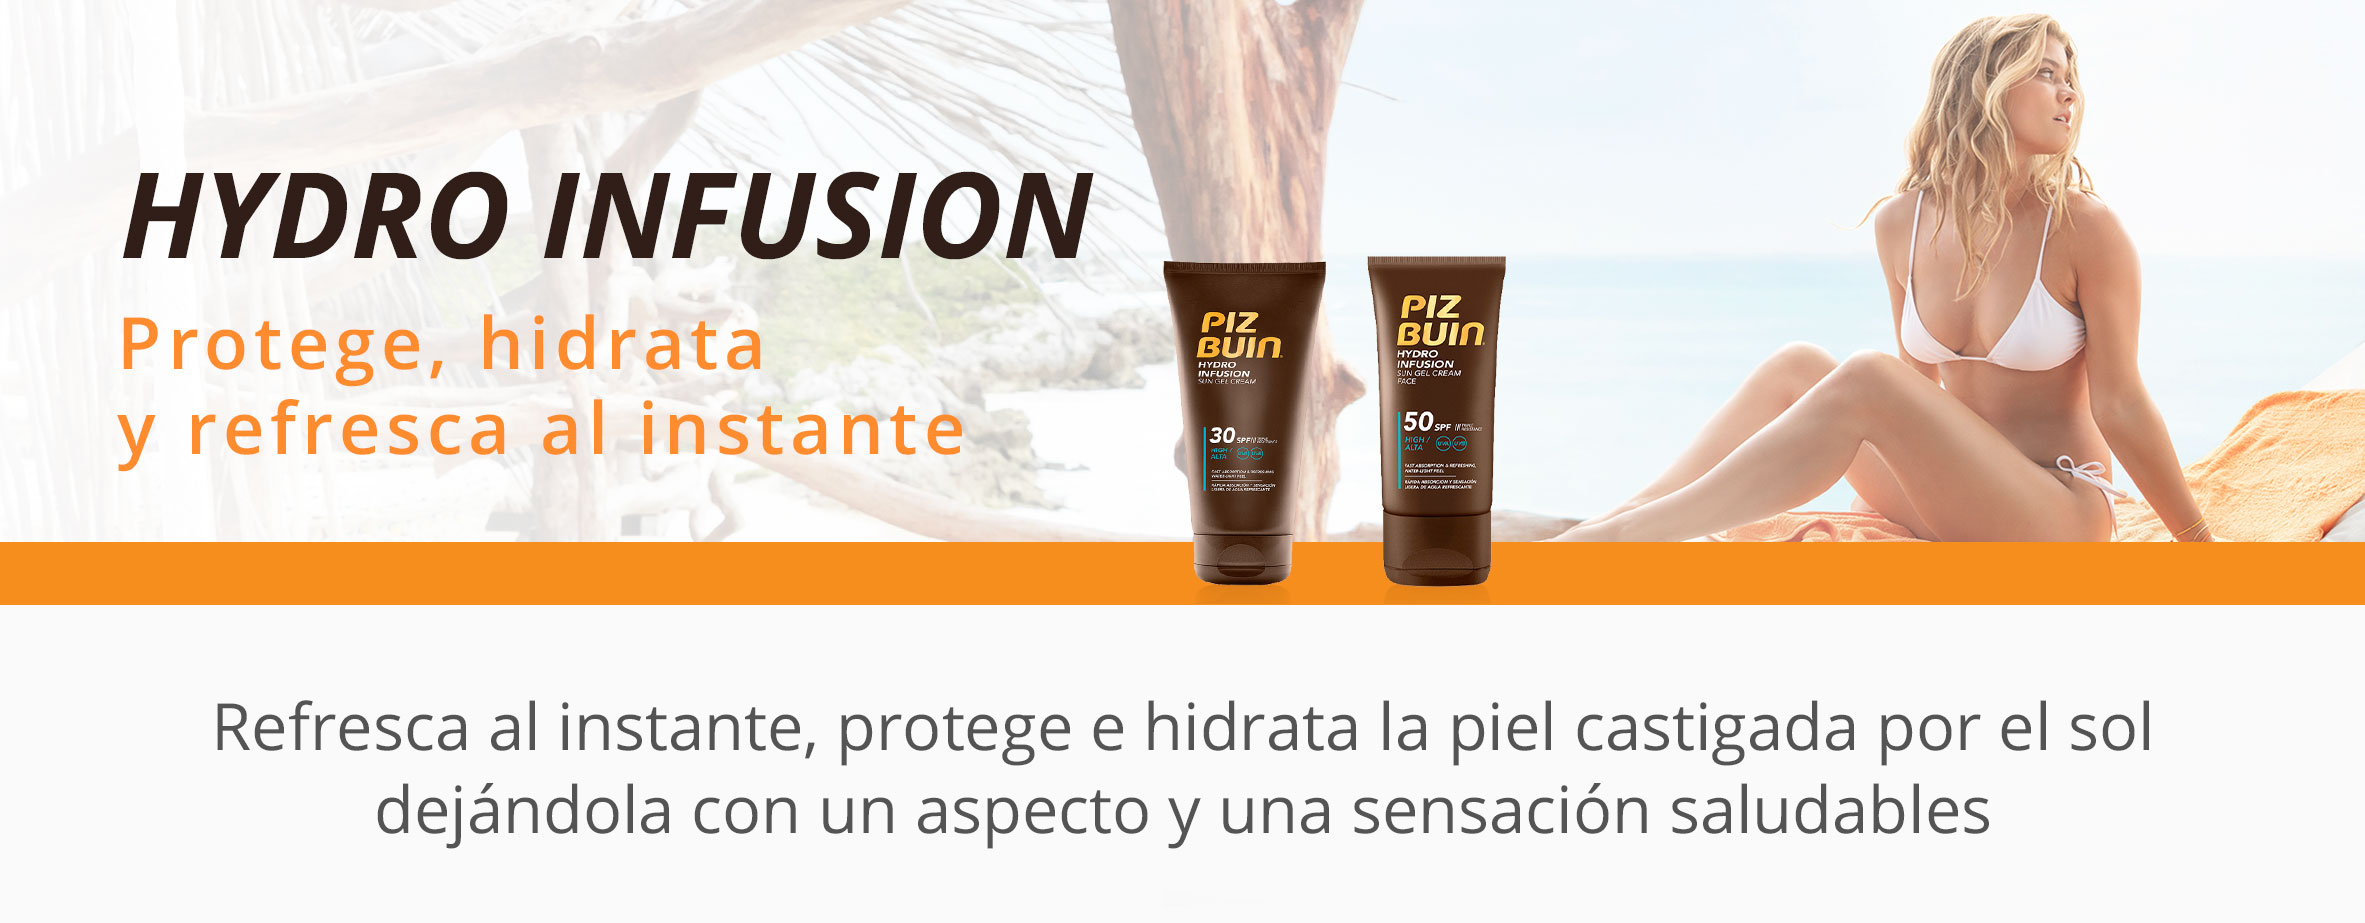 Piz Buin Hydro Infusion